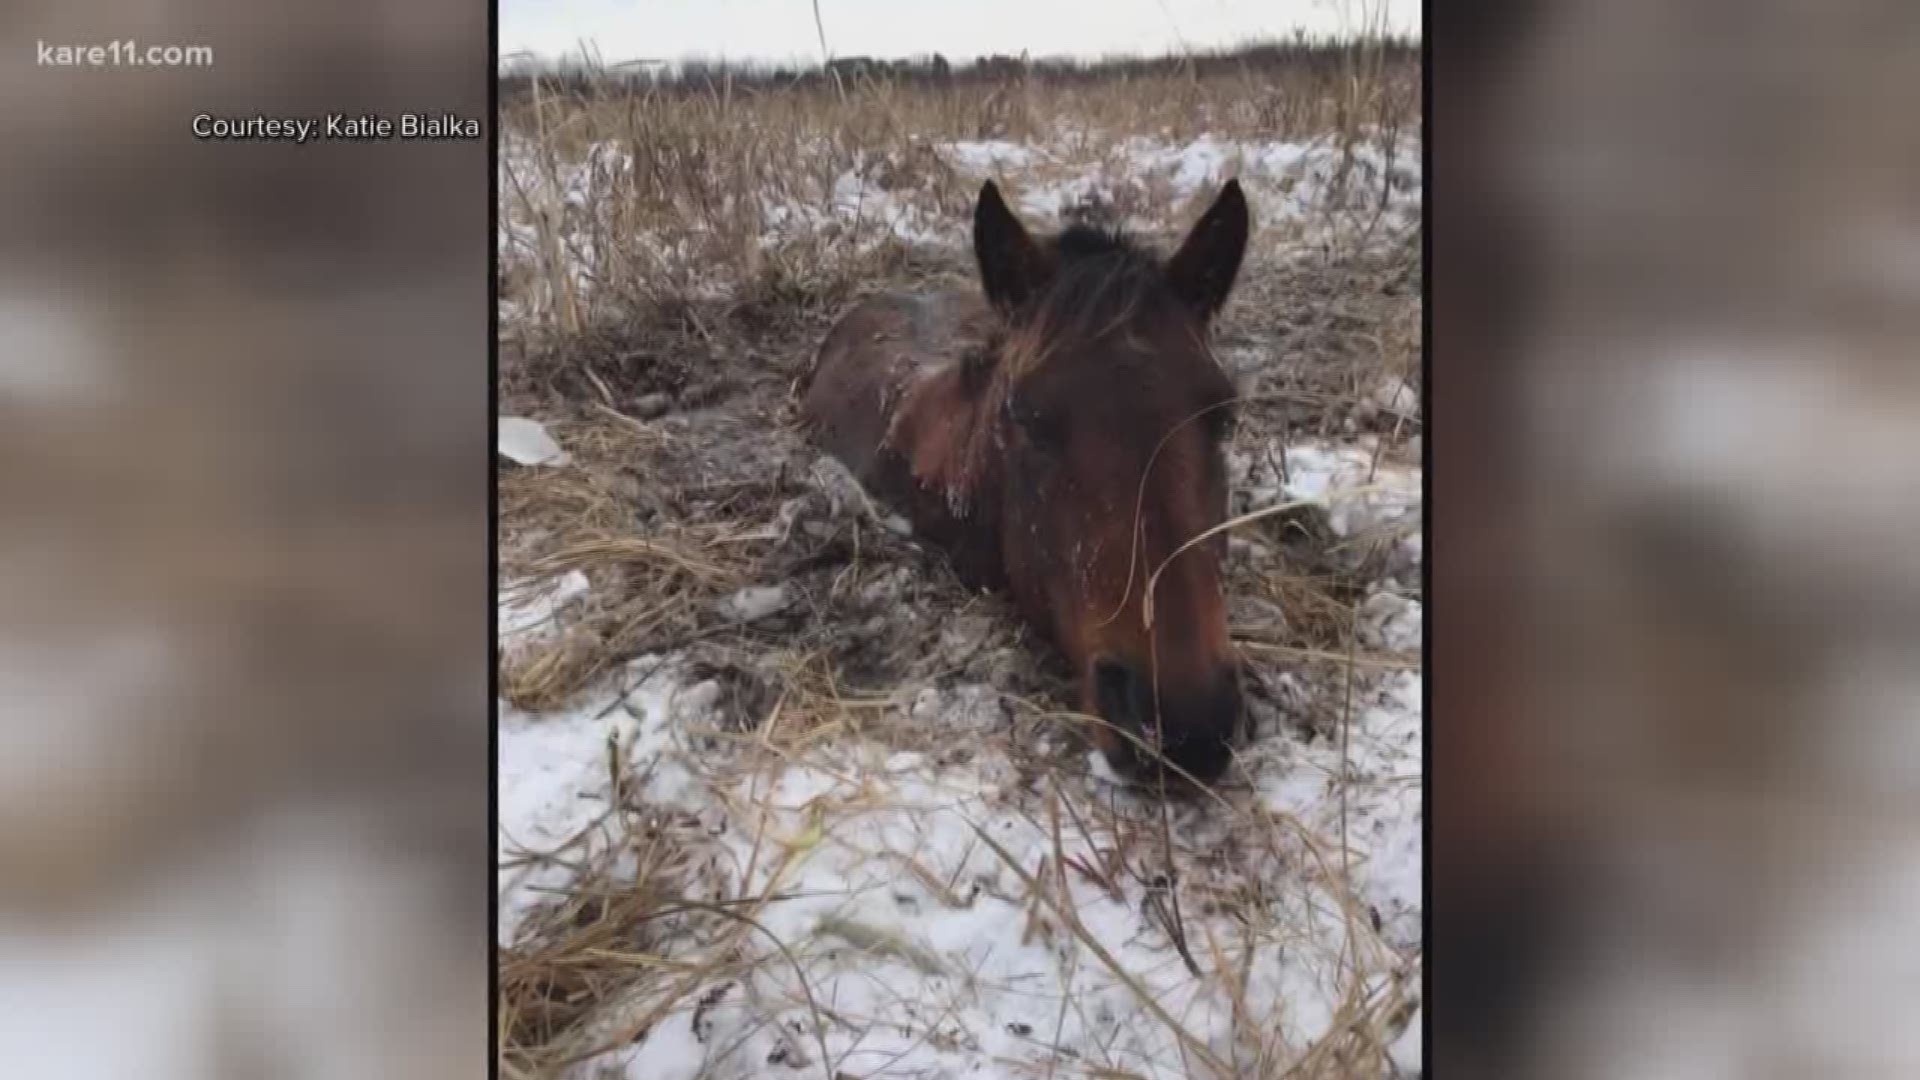 The January thaw made the ice covering the bog weak, and the horse ended up falling through.